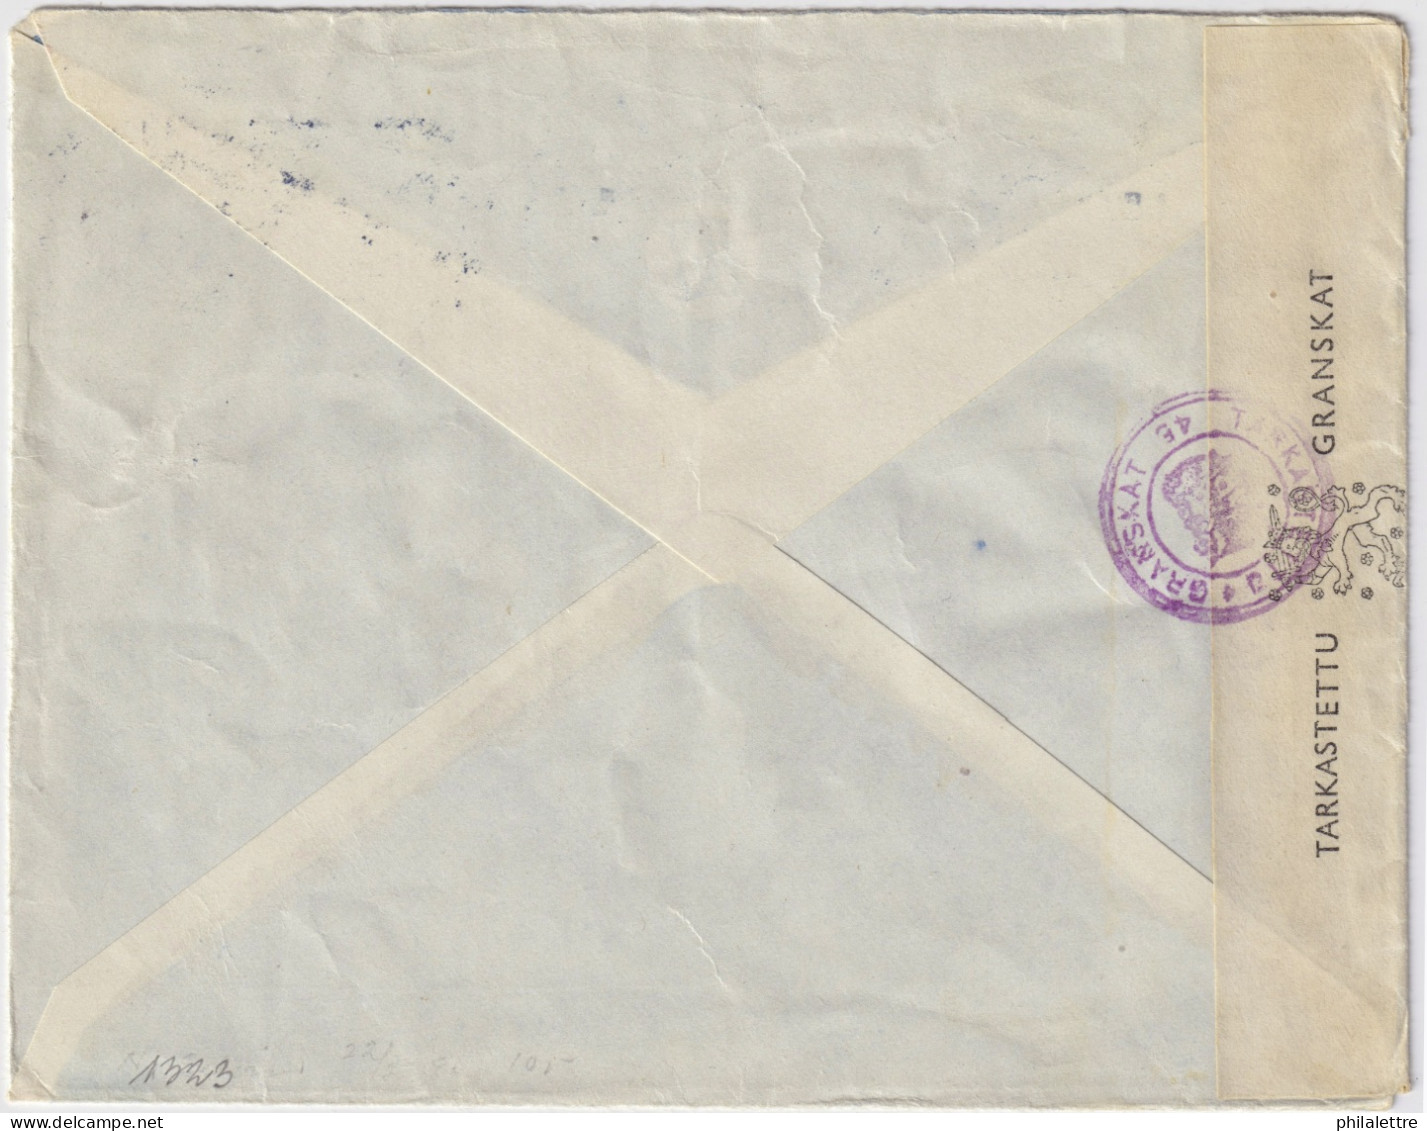 FINLAND - 1945 - Facit F258, F295 & F296 Red Cross (1942 & 45 Issues) On Censored Cover From HELSINKI To MOTALA, Sweden - Brieven En Documenten